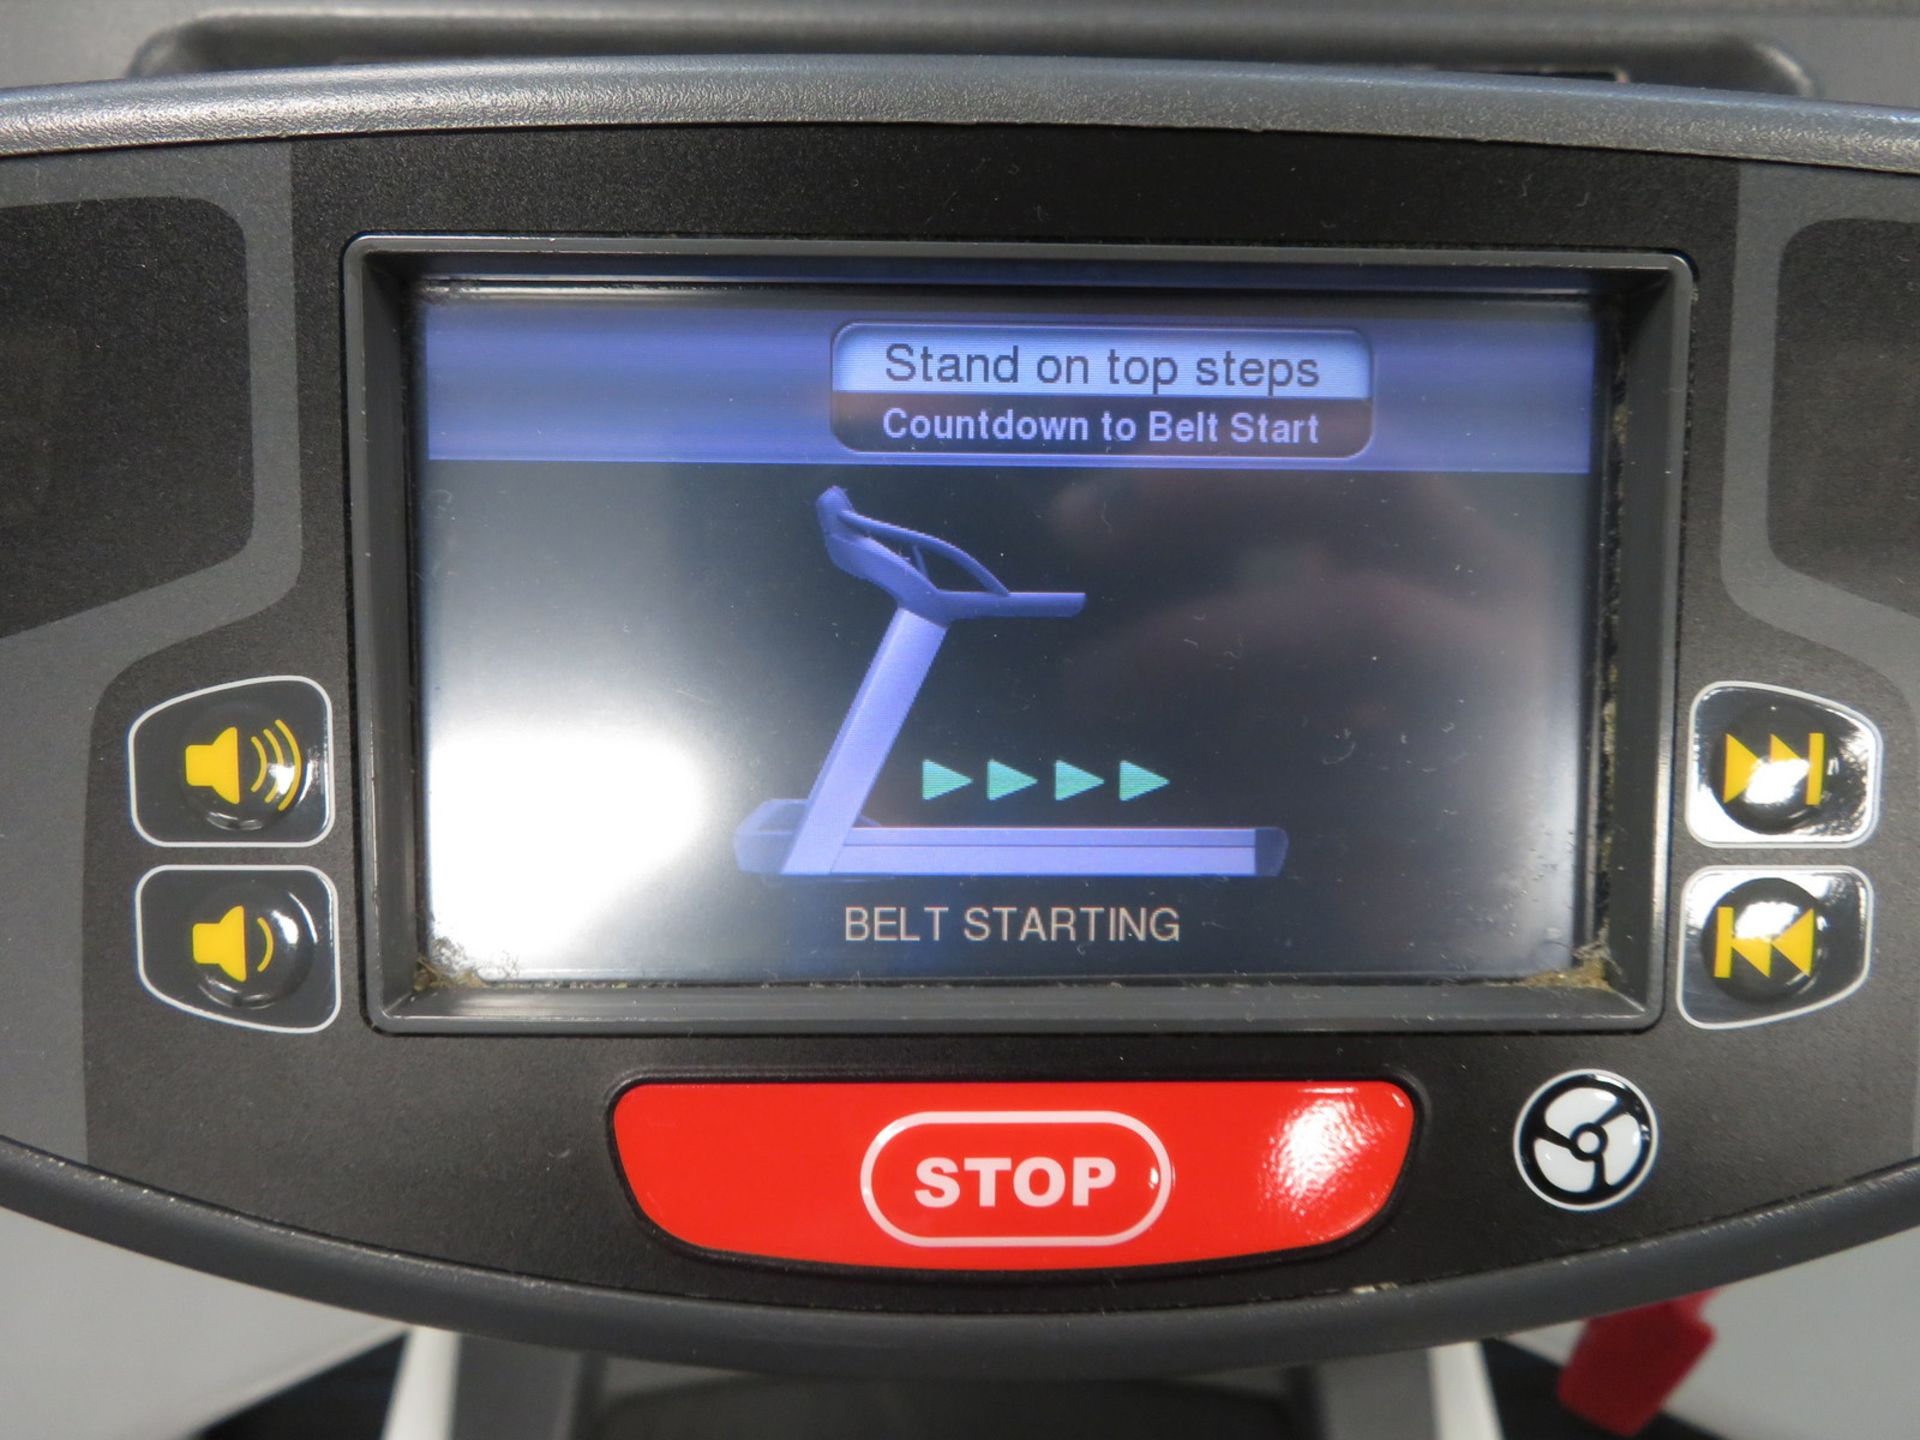 Cybex Treadmill Model: 770T, Working Condition With TV Display Monitor. - Image 6 of 11